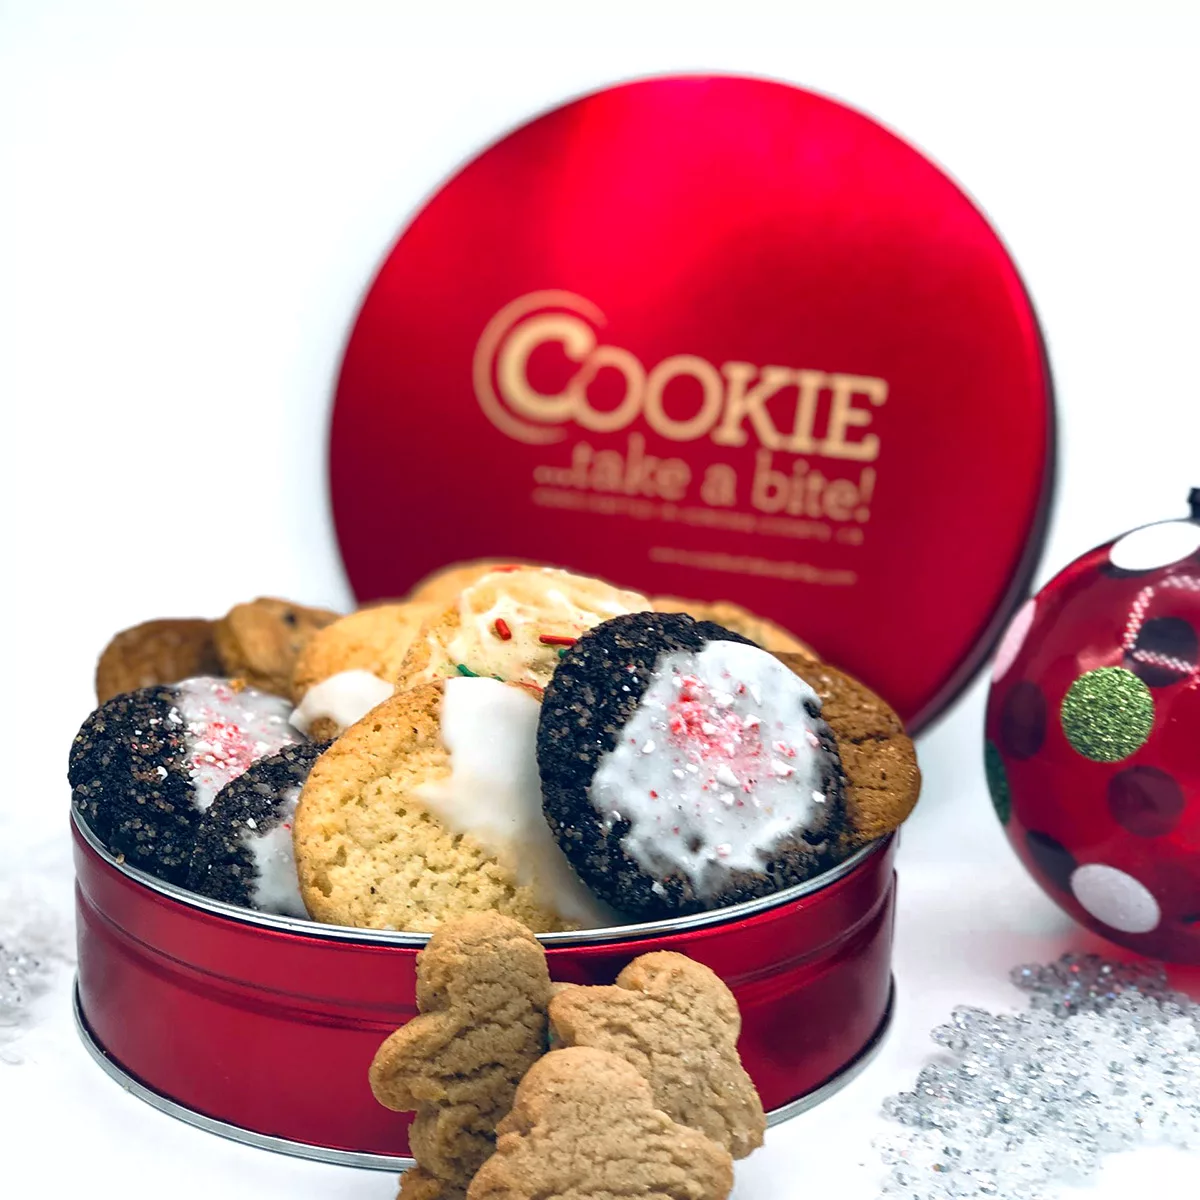 A premium holiday cookie gift tin, with over 30 all natural cookies in seasonal flavors.